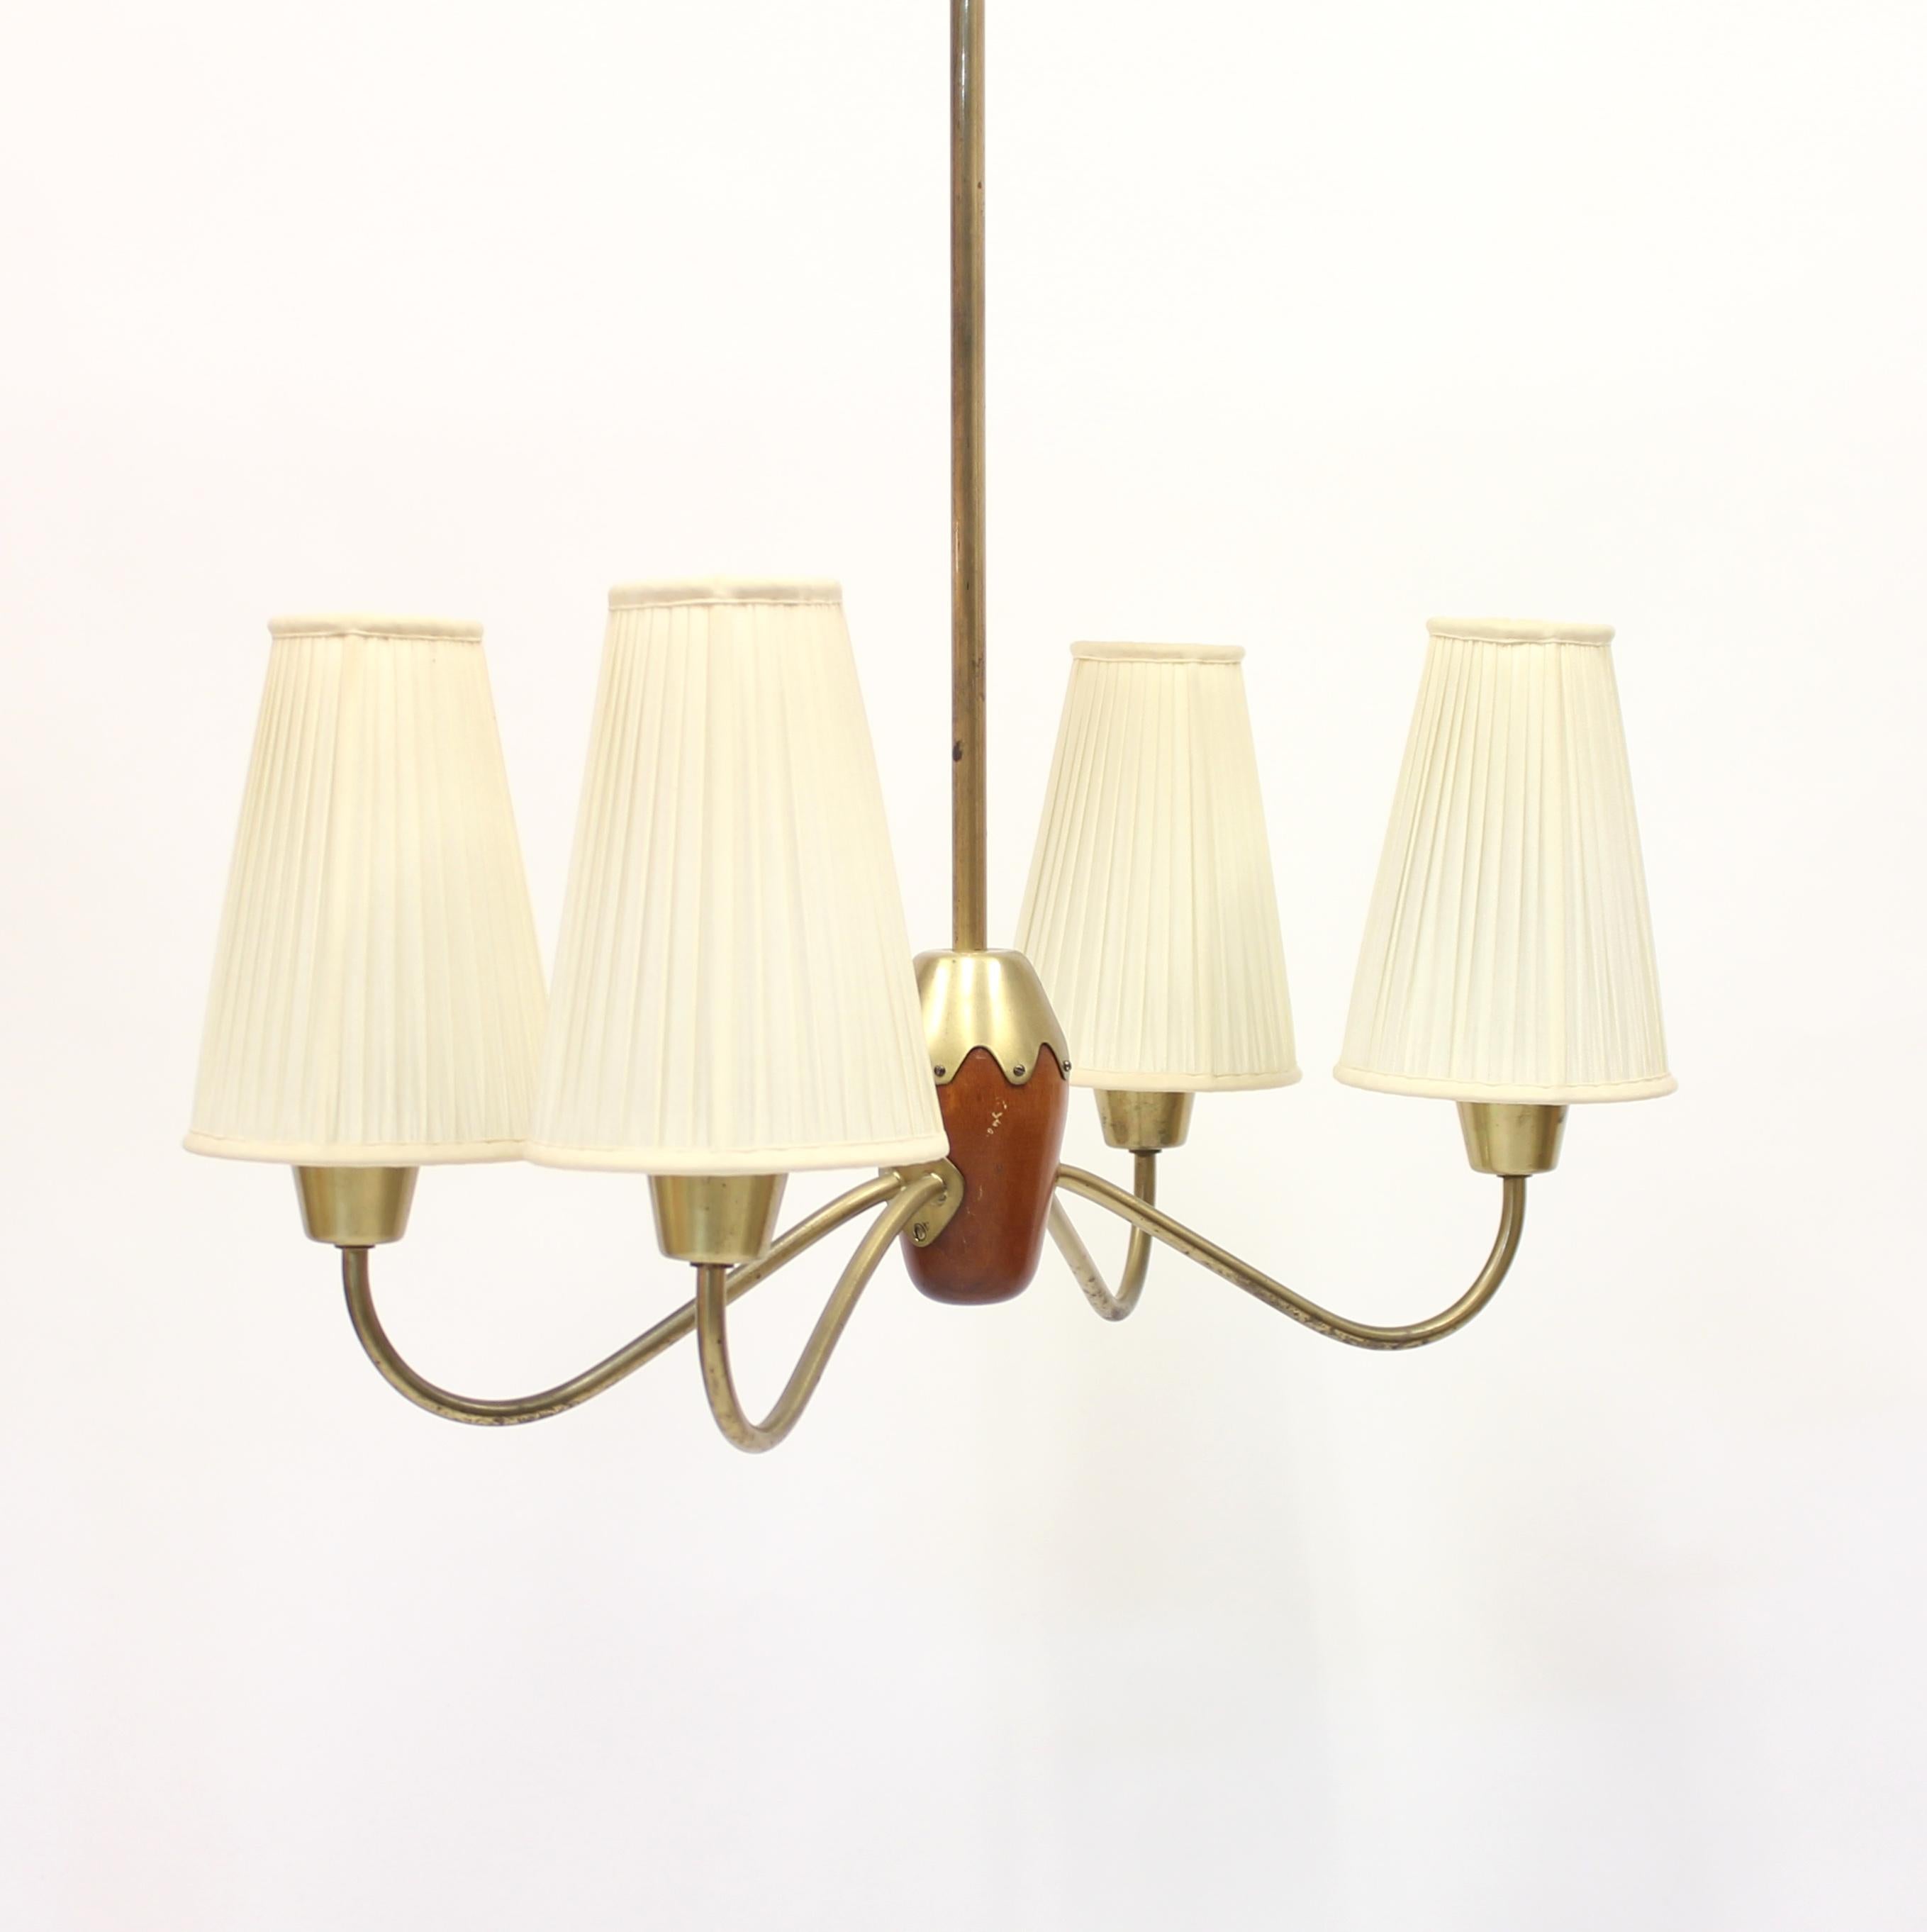 20th Century 4-Light Ceiling Lamp, Attributed to ASEA, 1950s